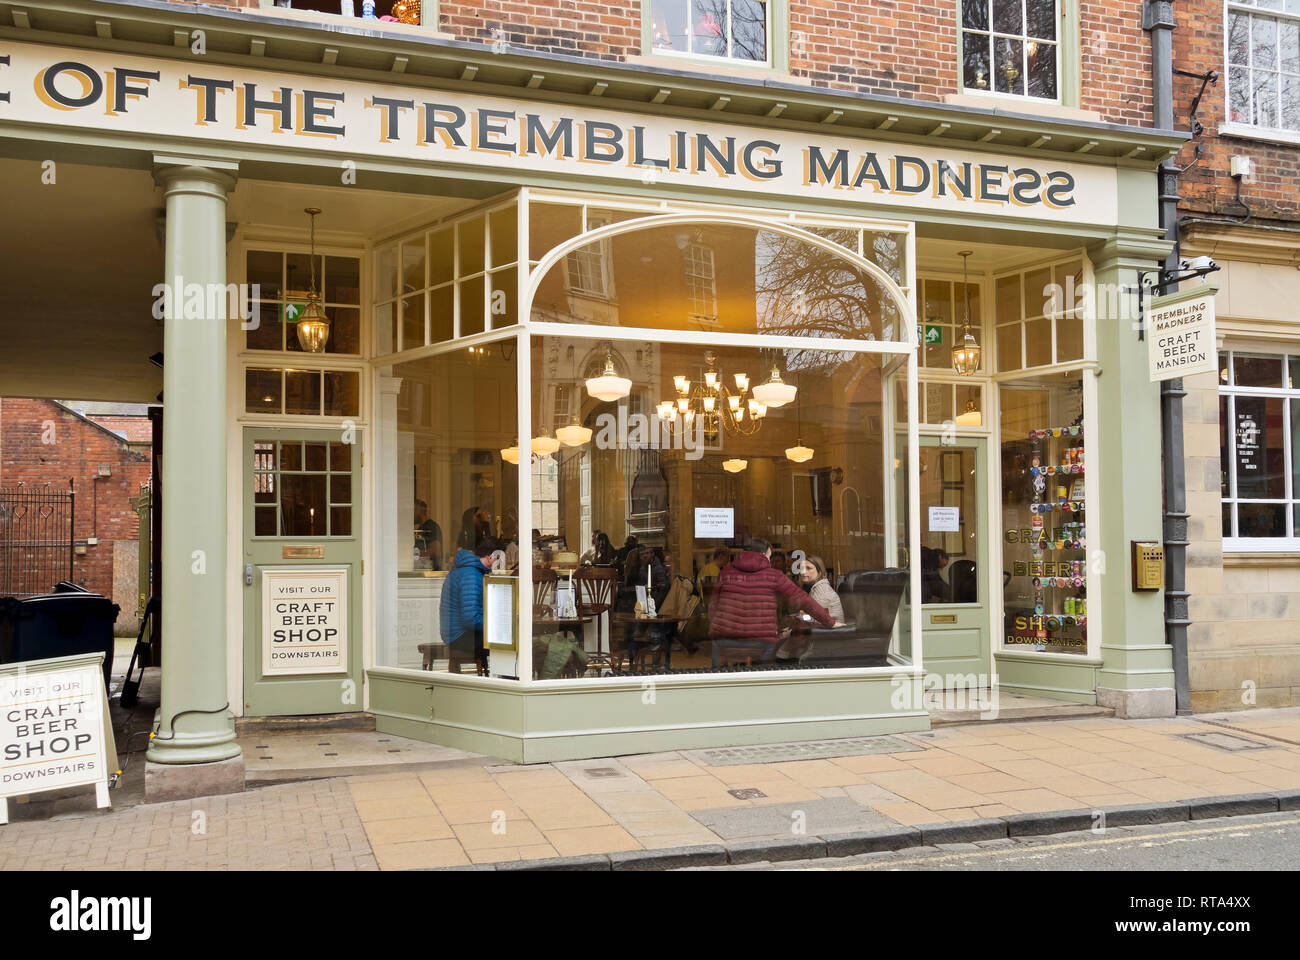 House of the Trembling Madness bar pub in the city town centre Lendal York North Yorkshire England UK United Kingdom GB Great Britain Stock Photo